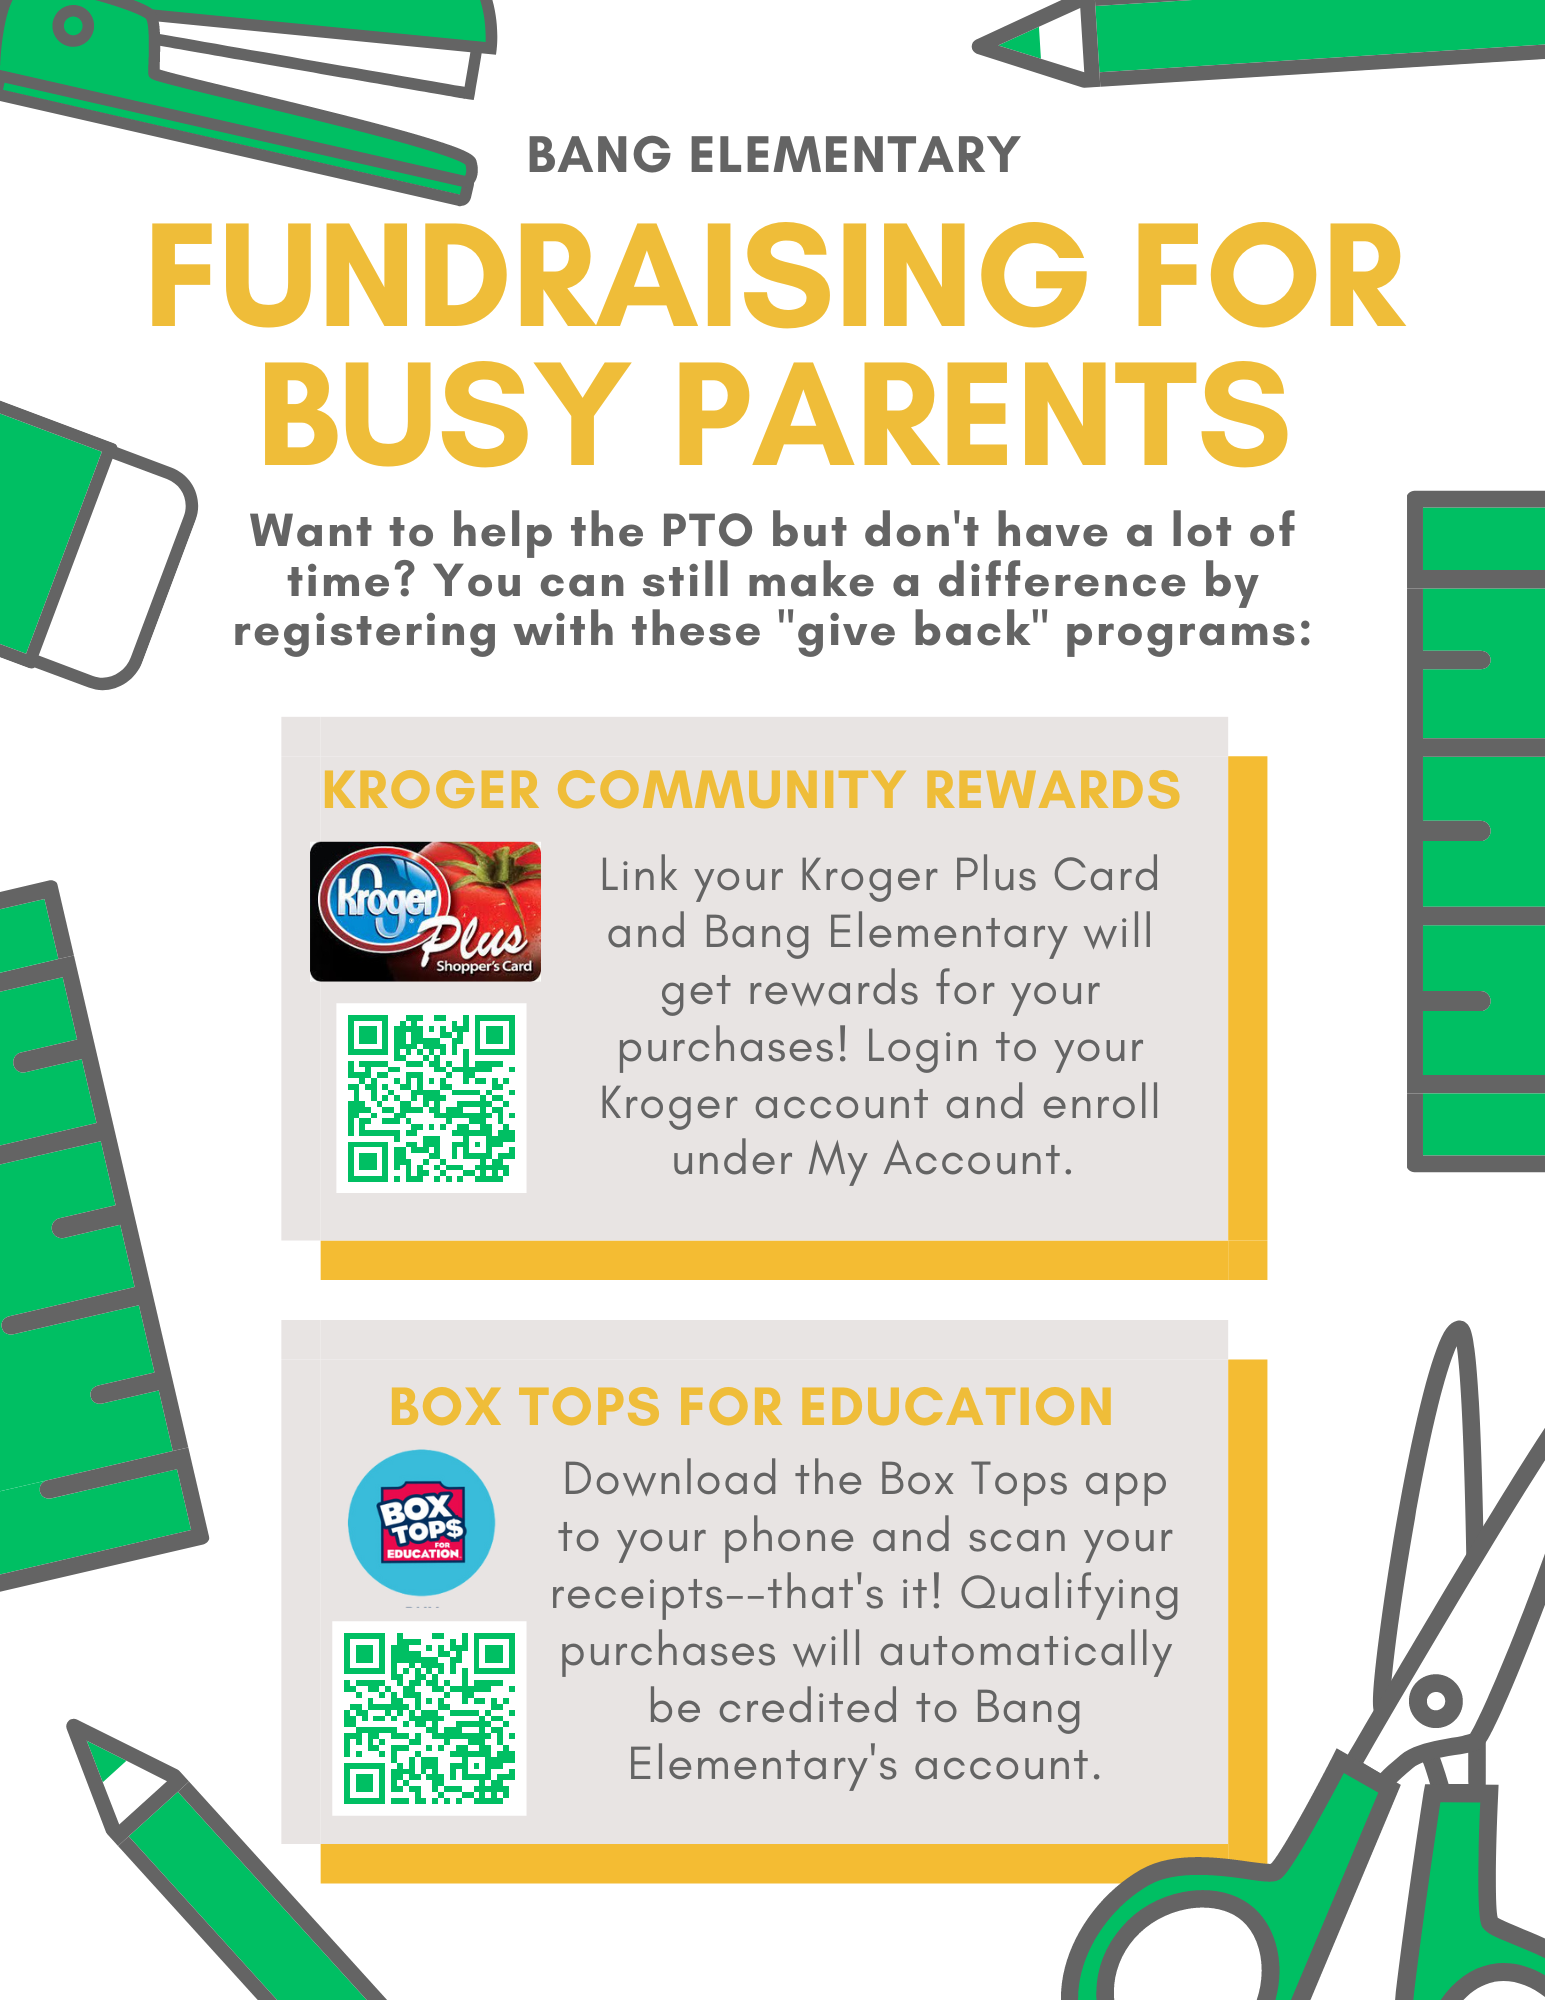 Fundraising for busy parents